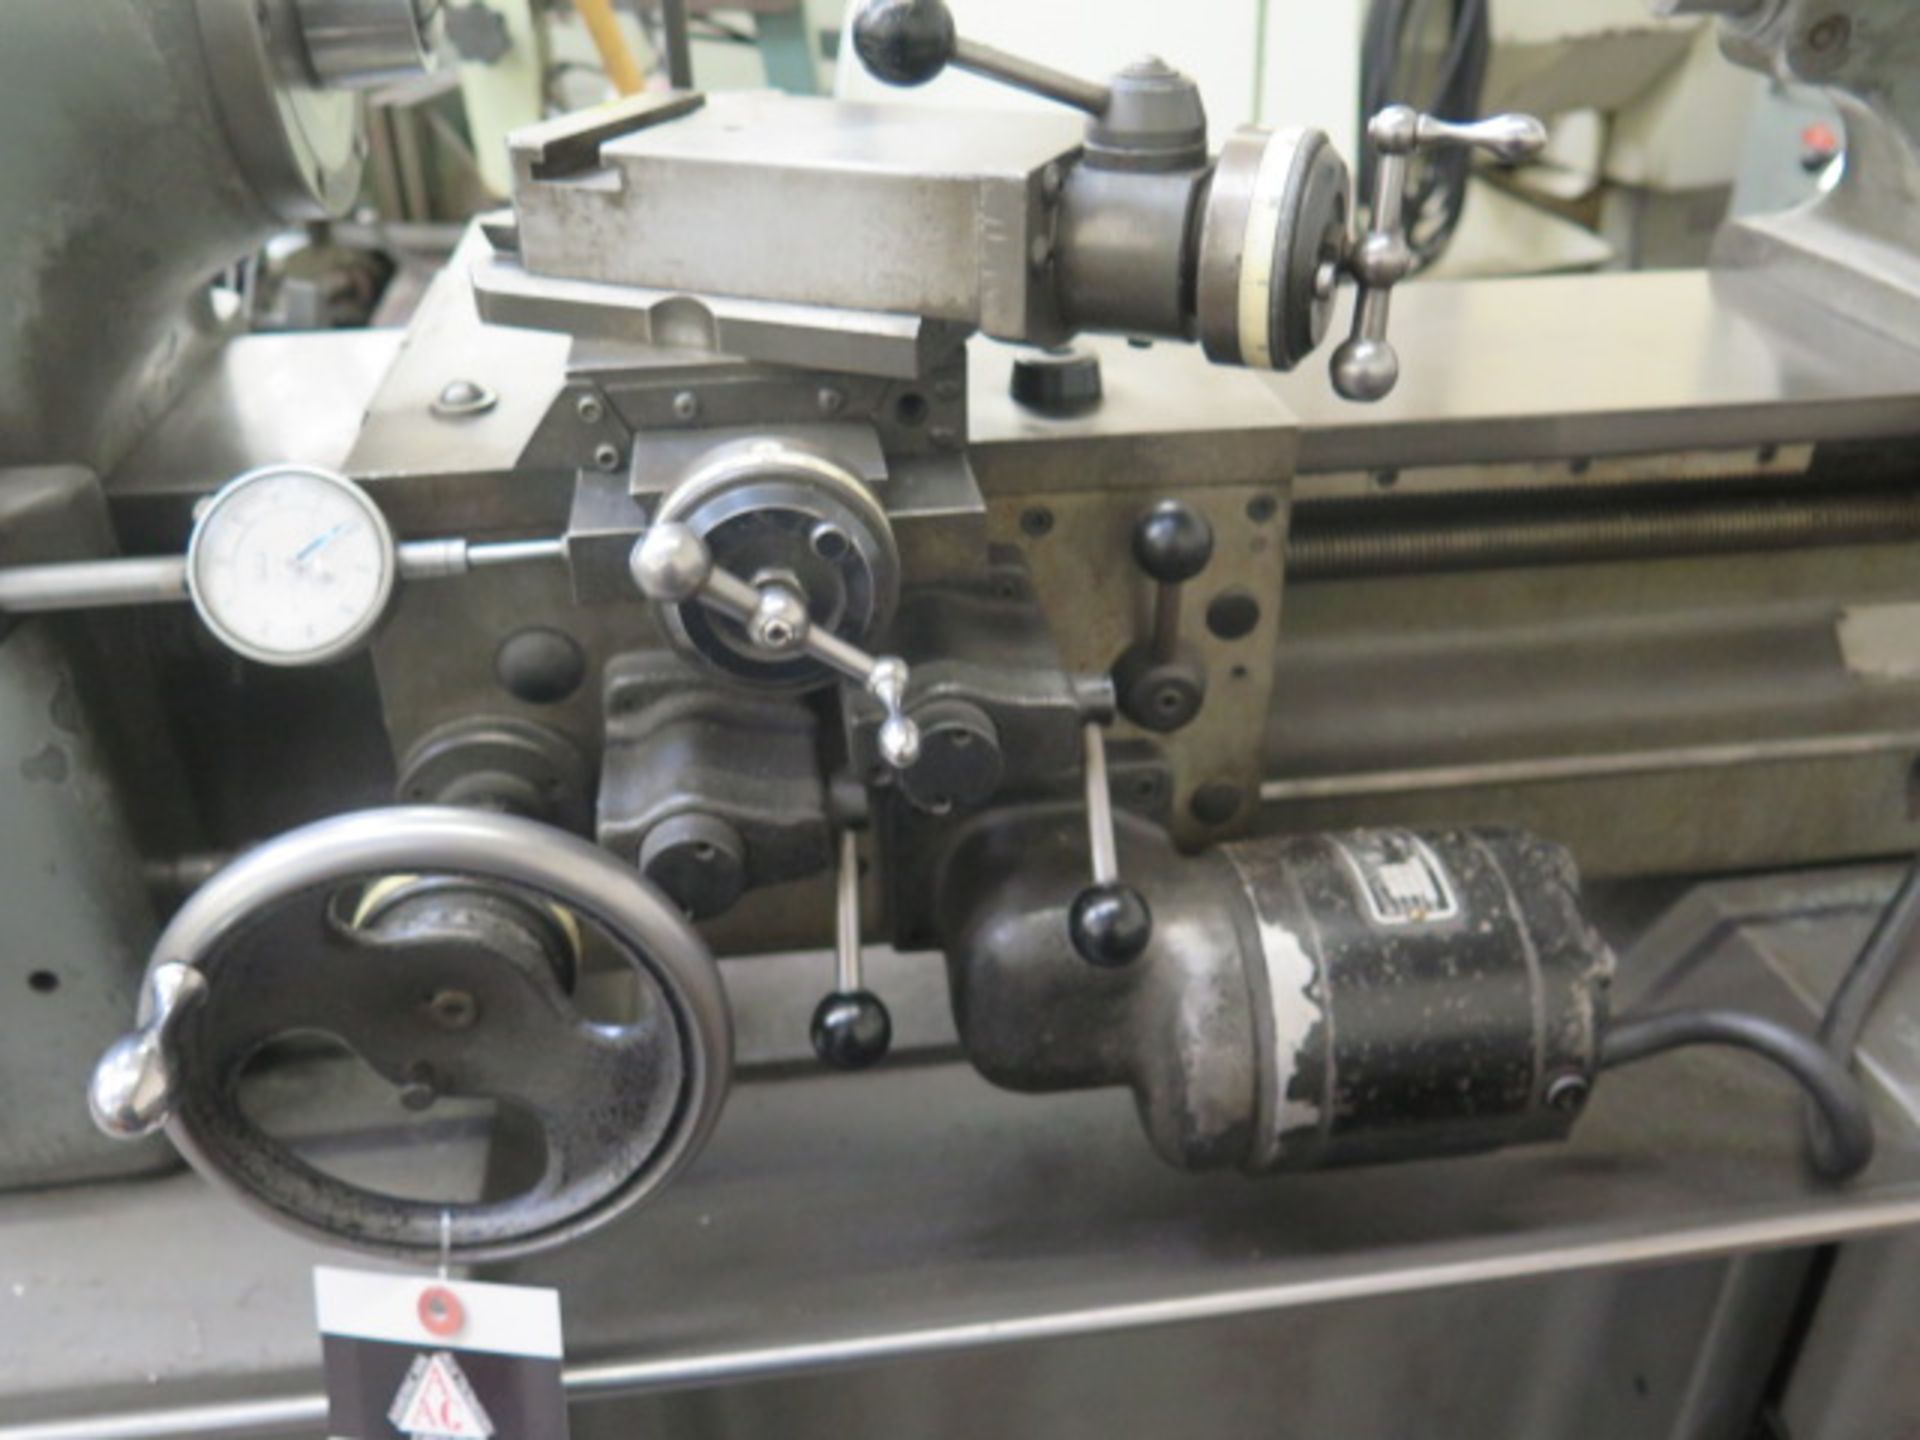 Hardinge HLV-H Tool Room Lathe s/n HLV-H-4836 w/ 125-3000 RPM, Inch Threading, Tailstock, SOLD AS IS - Image 6 of 14